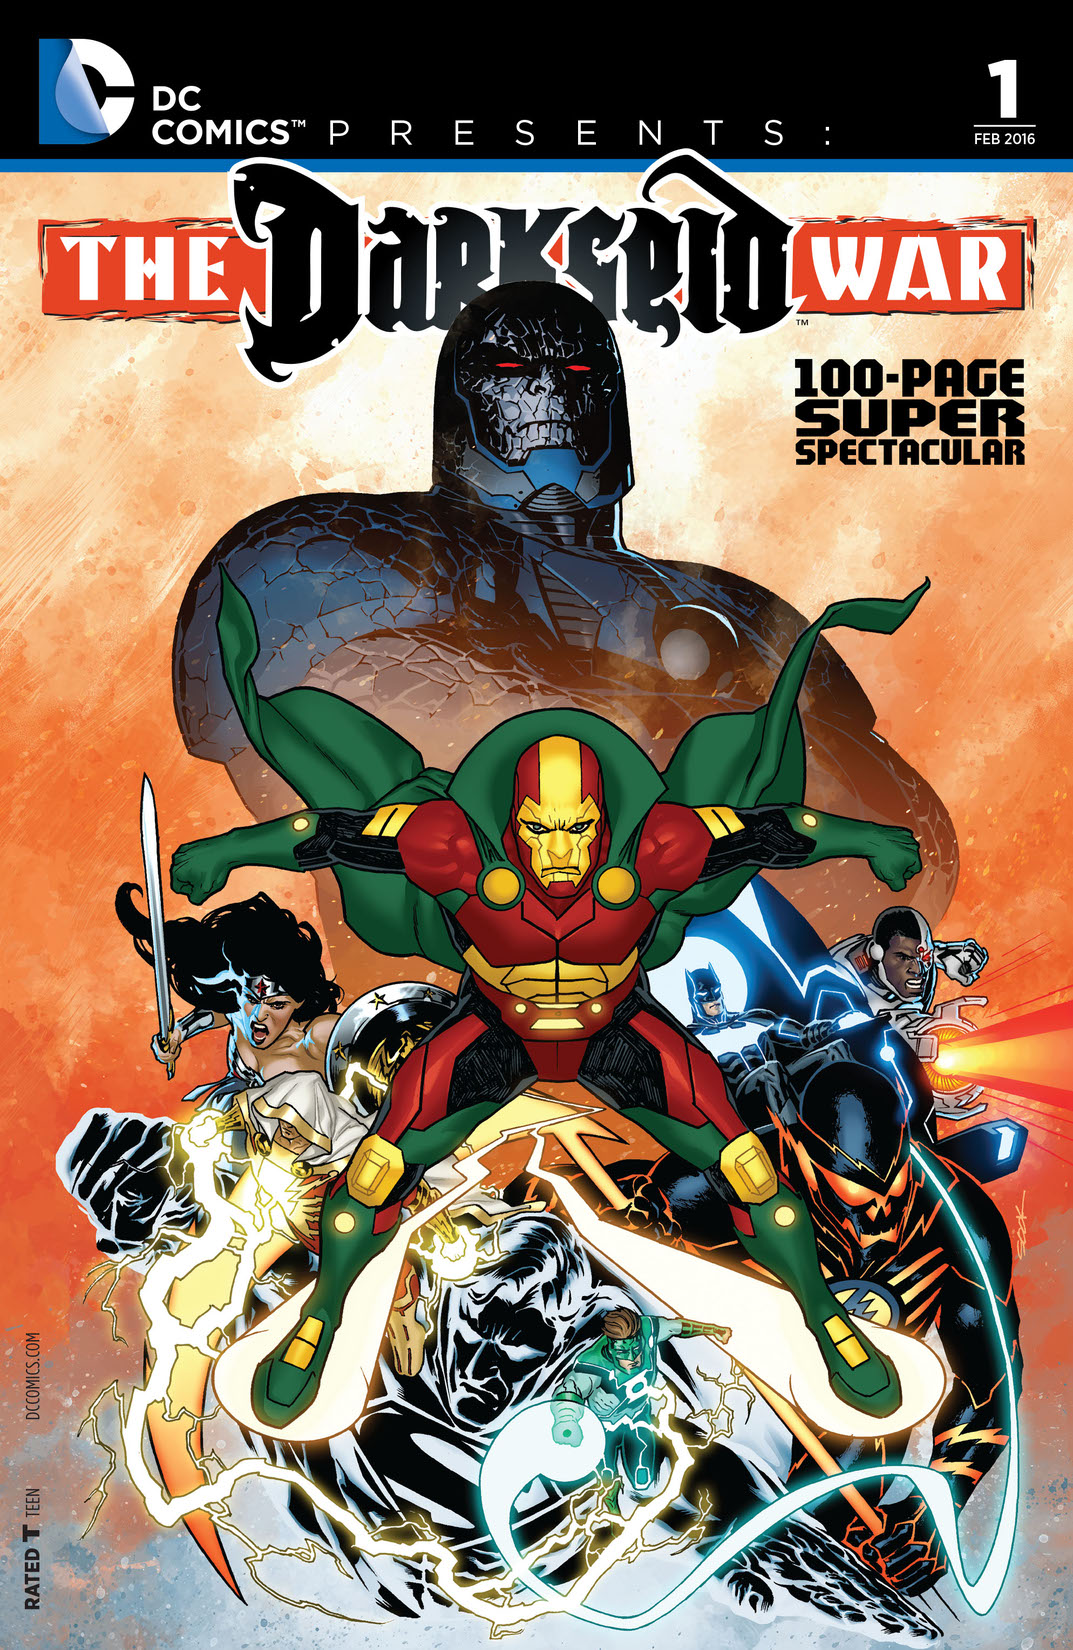 DC Comics Presents: Darkseid War 100-Page Spectacular (-) #1 preview images